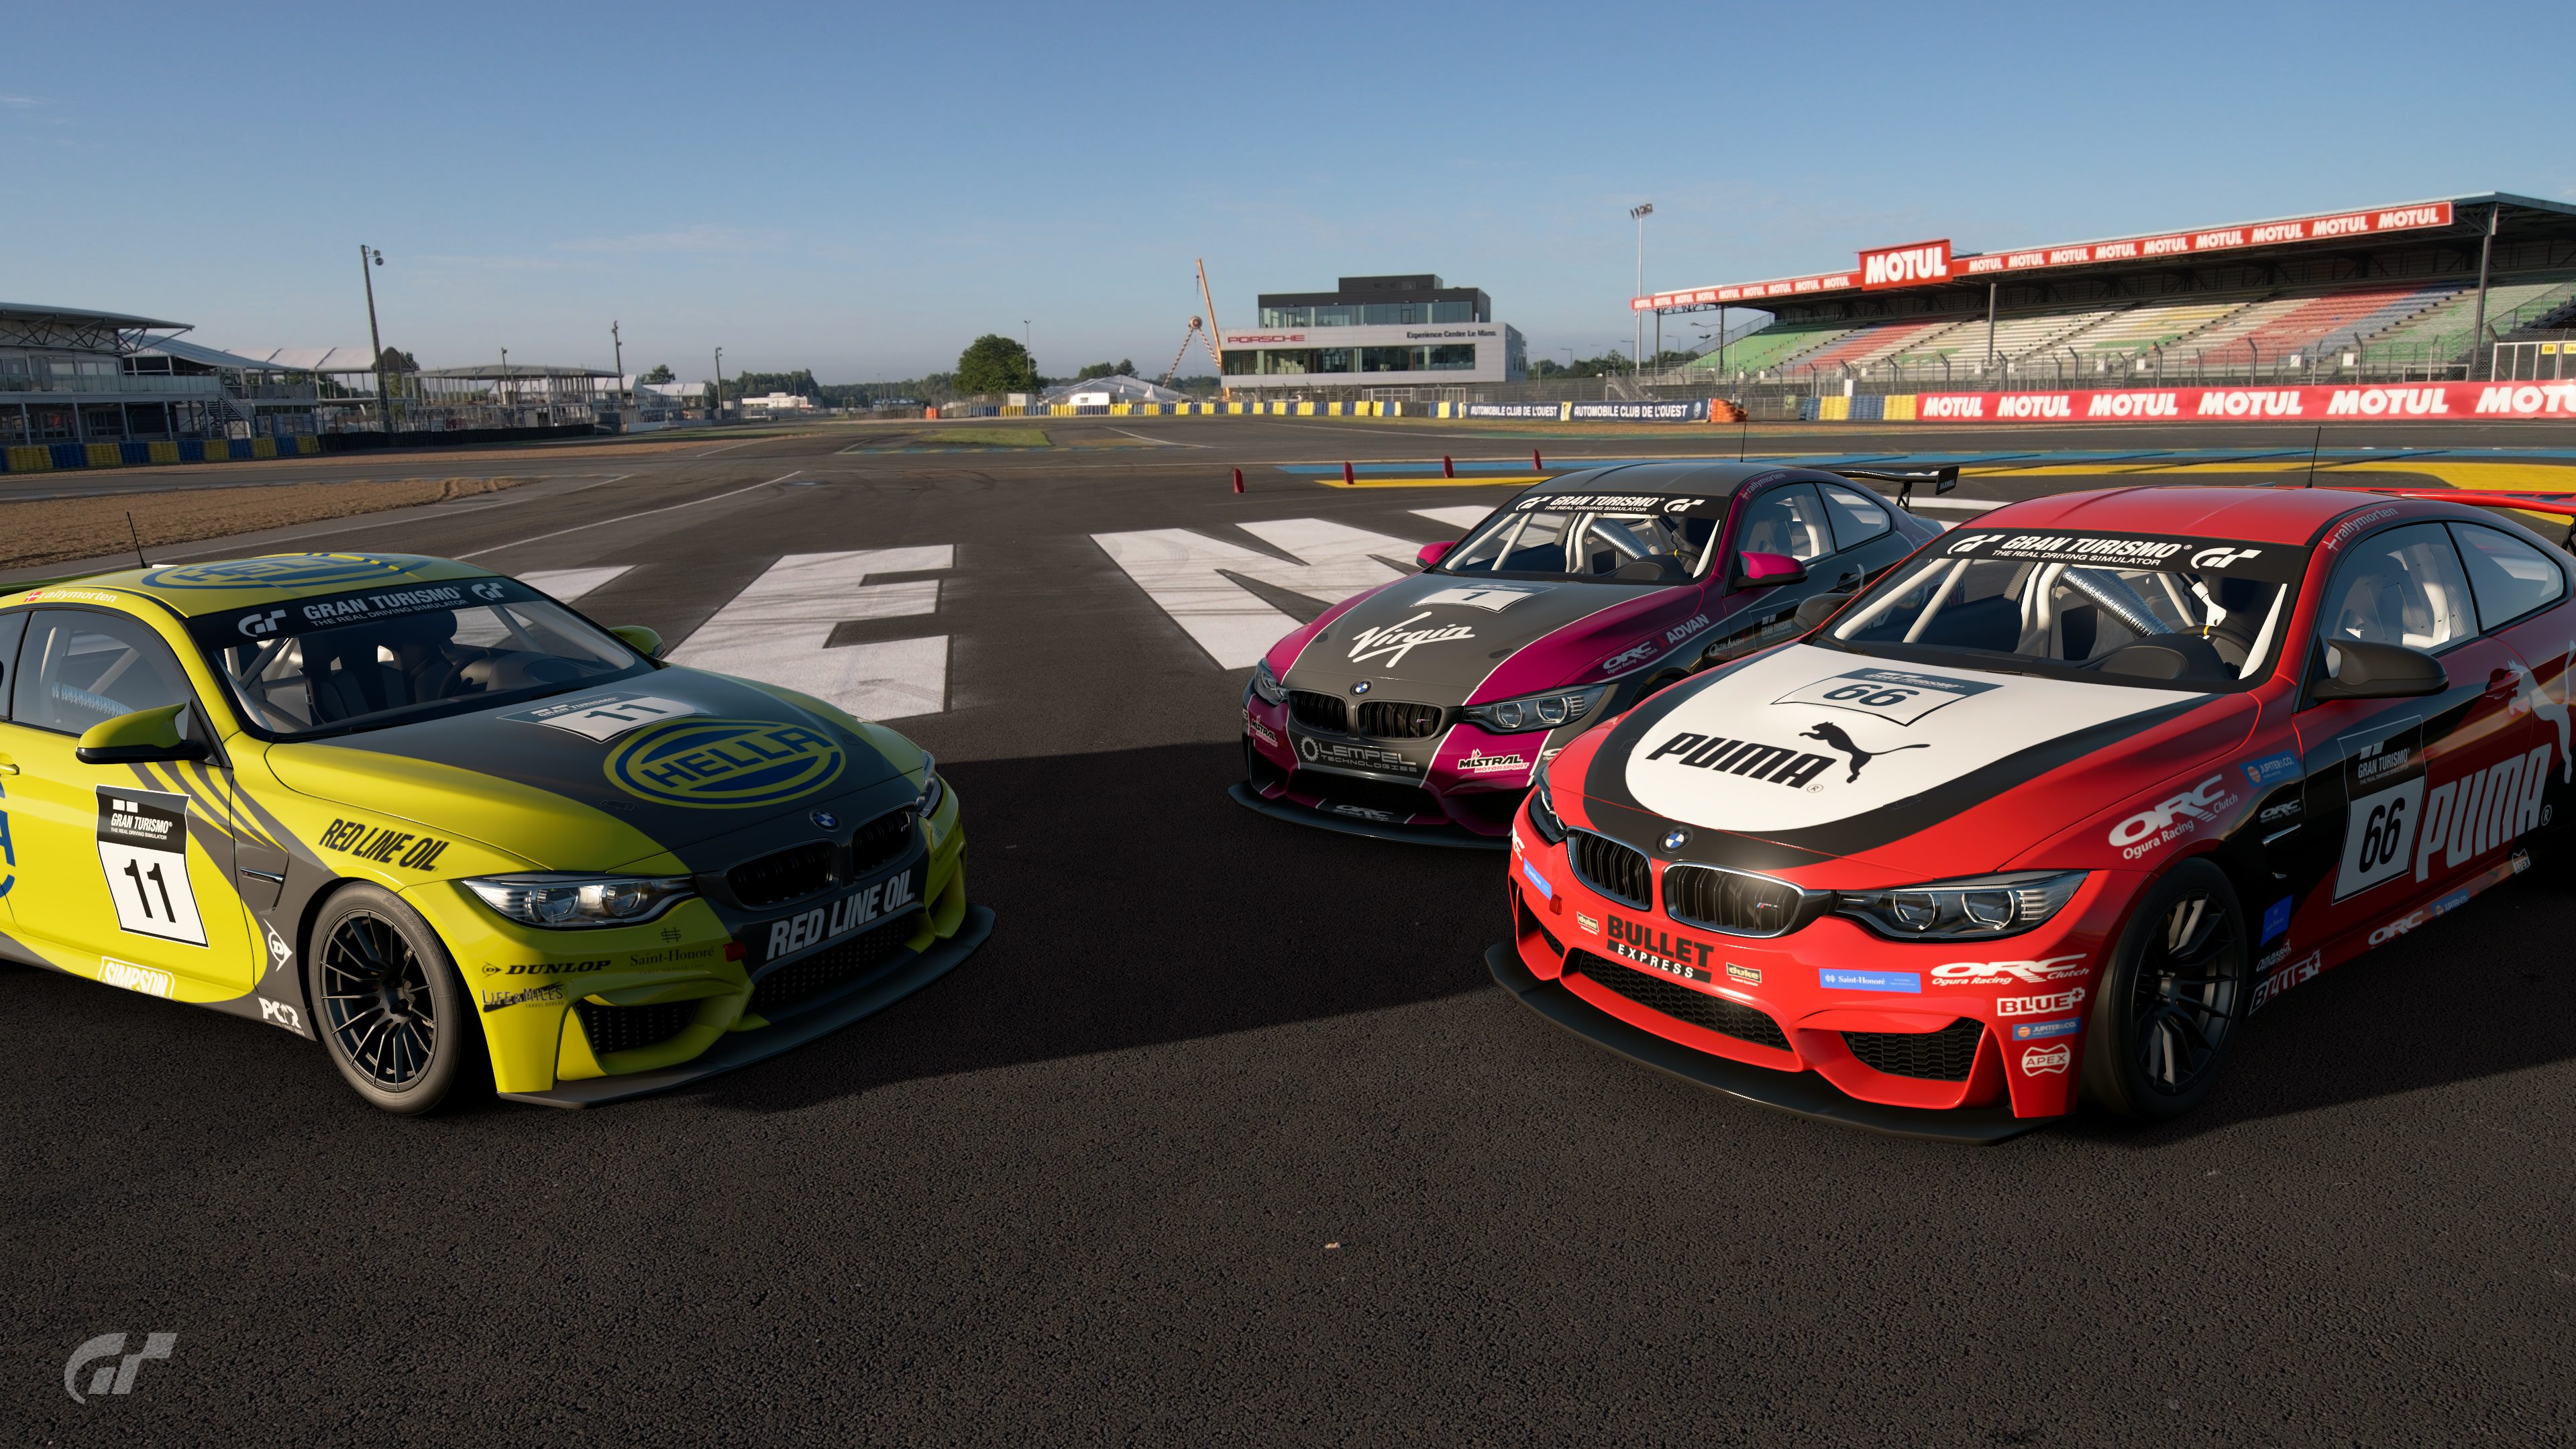 Race Driver: Grid touring cars turned M4 Gr.4s